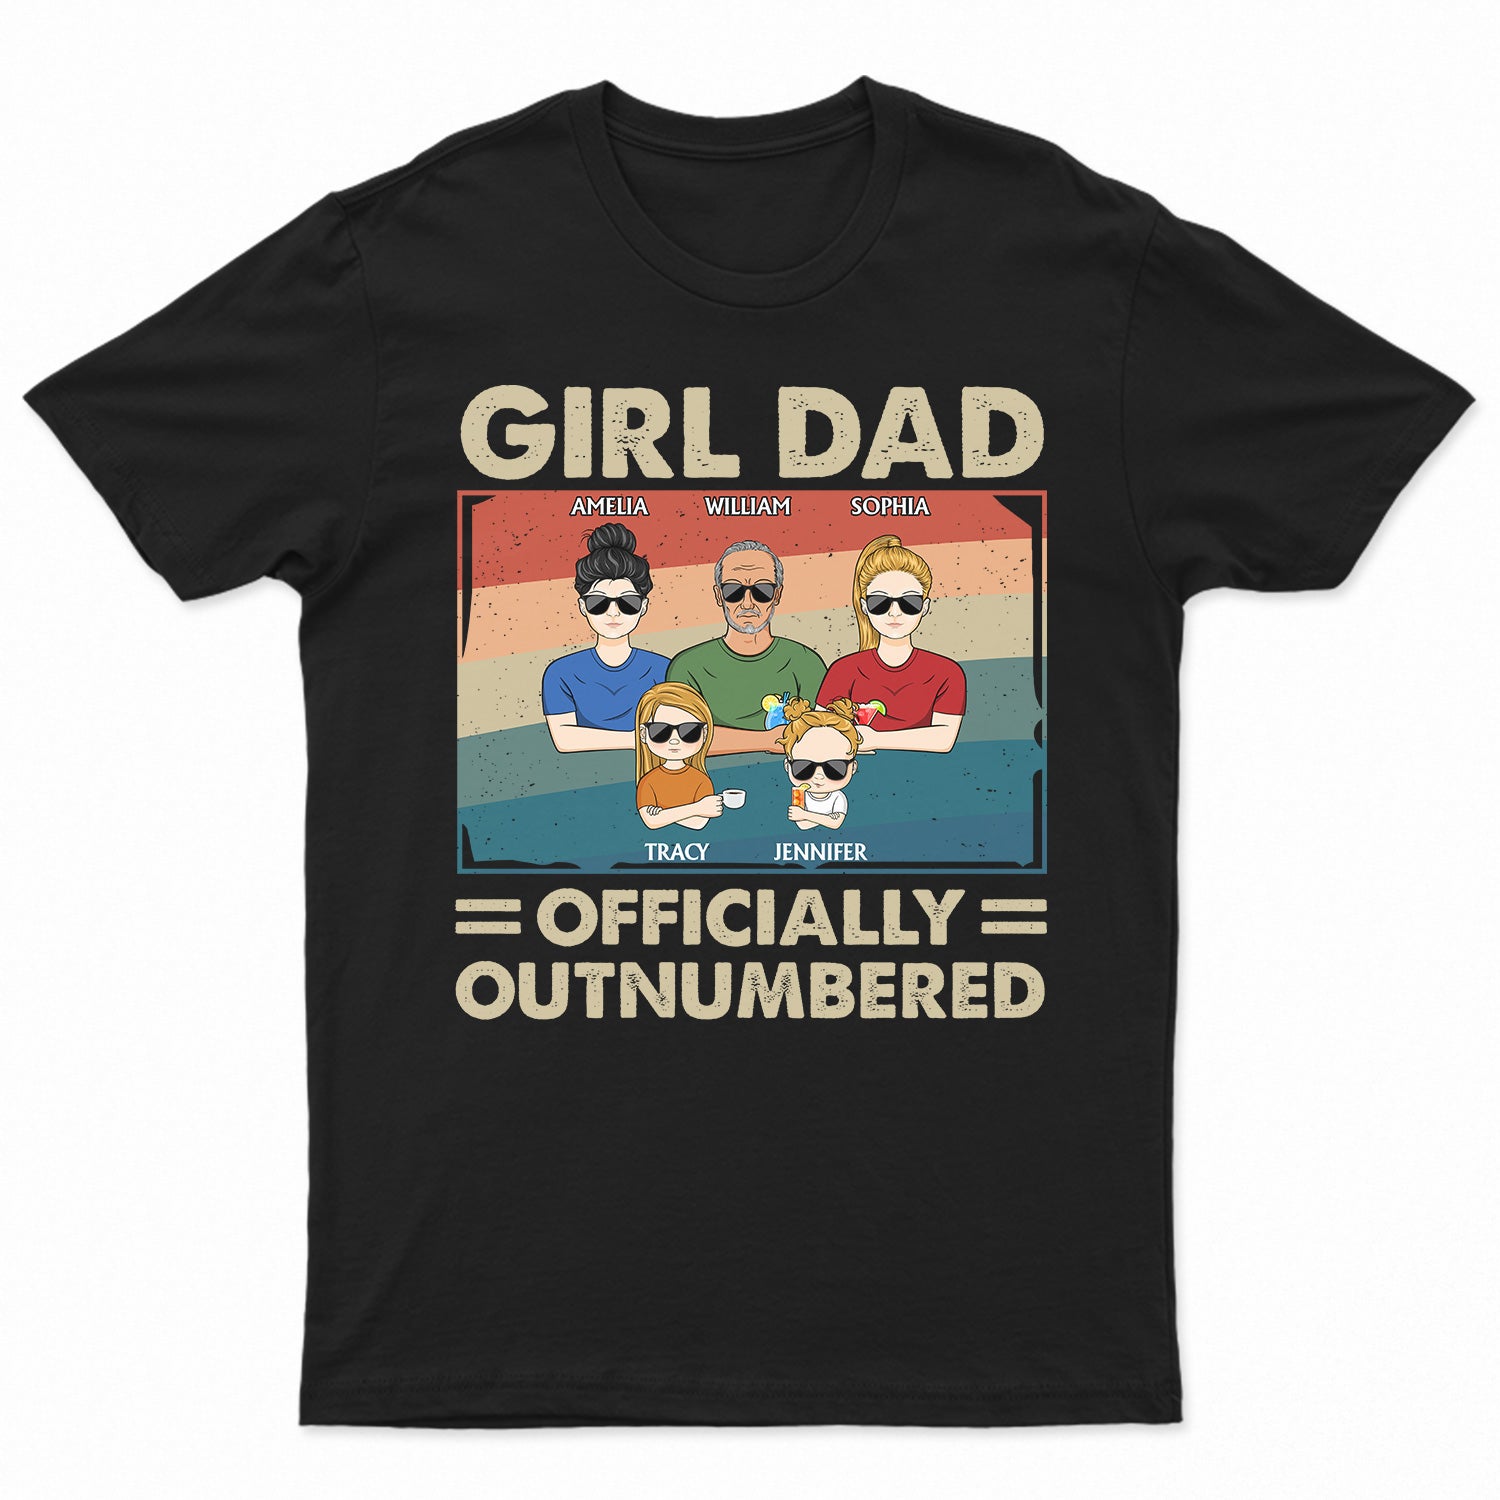 Girl Dad Officially Outnumbered - Funny Gift For Dad, Father, Grandpa - Personalized T Shirt